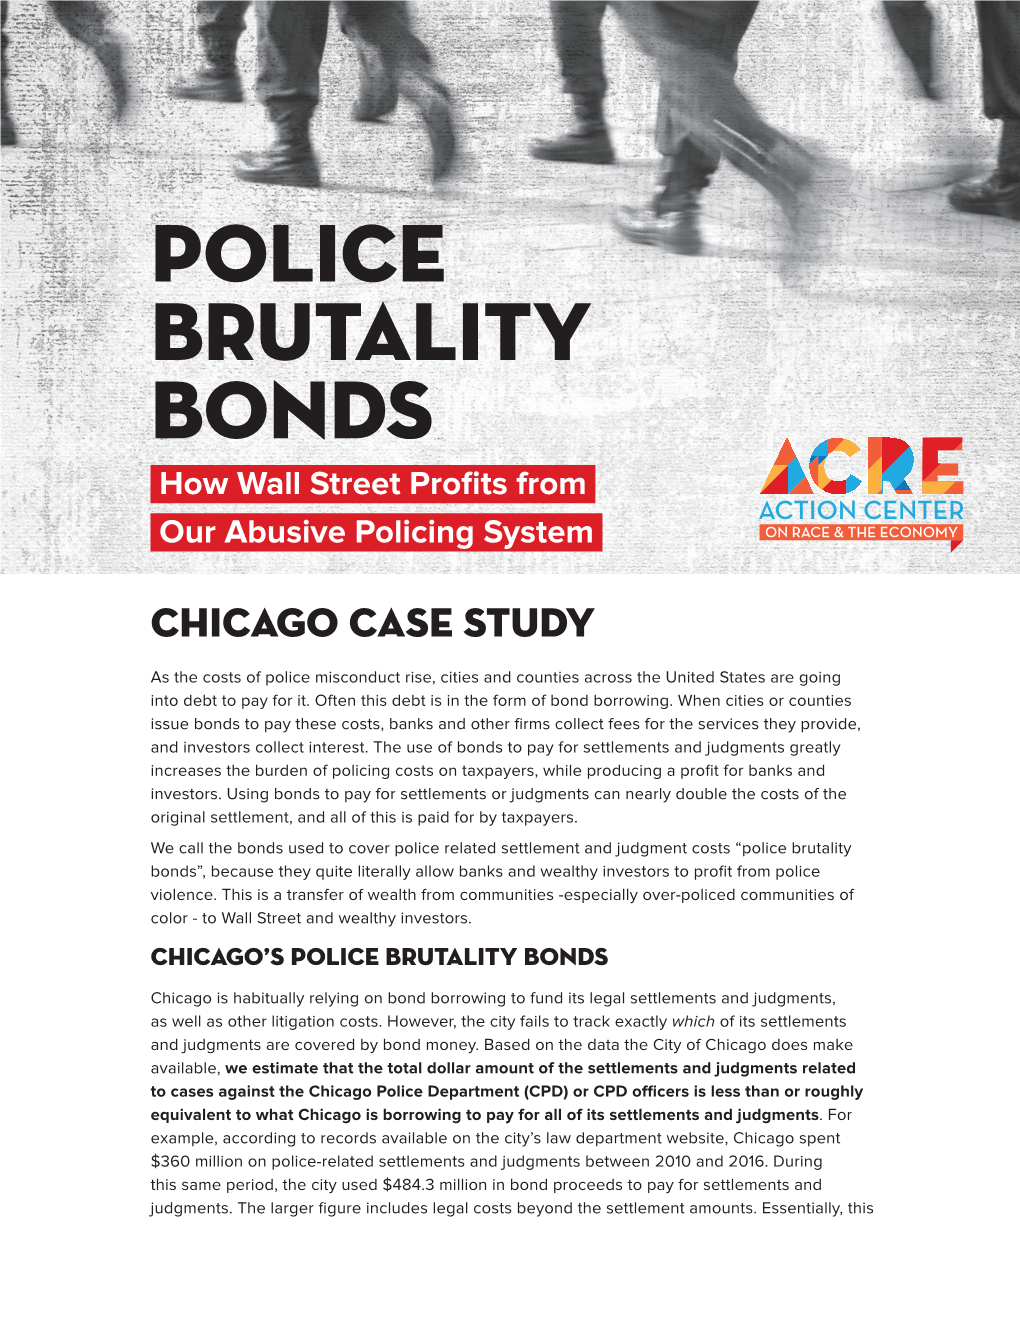 POLICE BRUTALITY BONDS How Wall Street Profits from Our Abusive Policing System